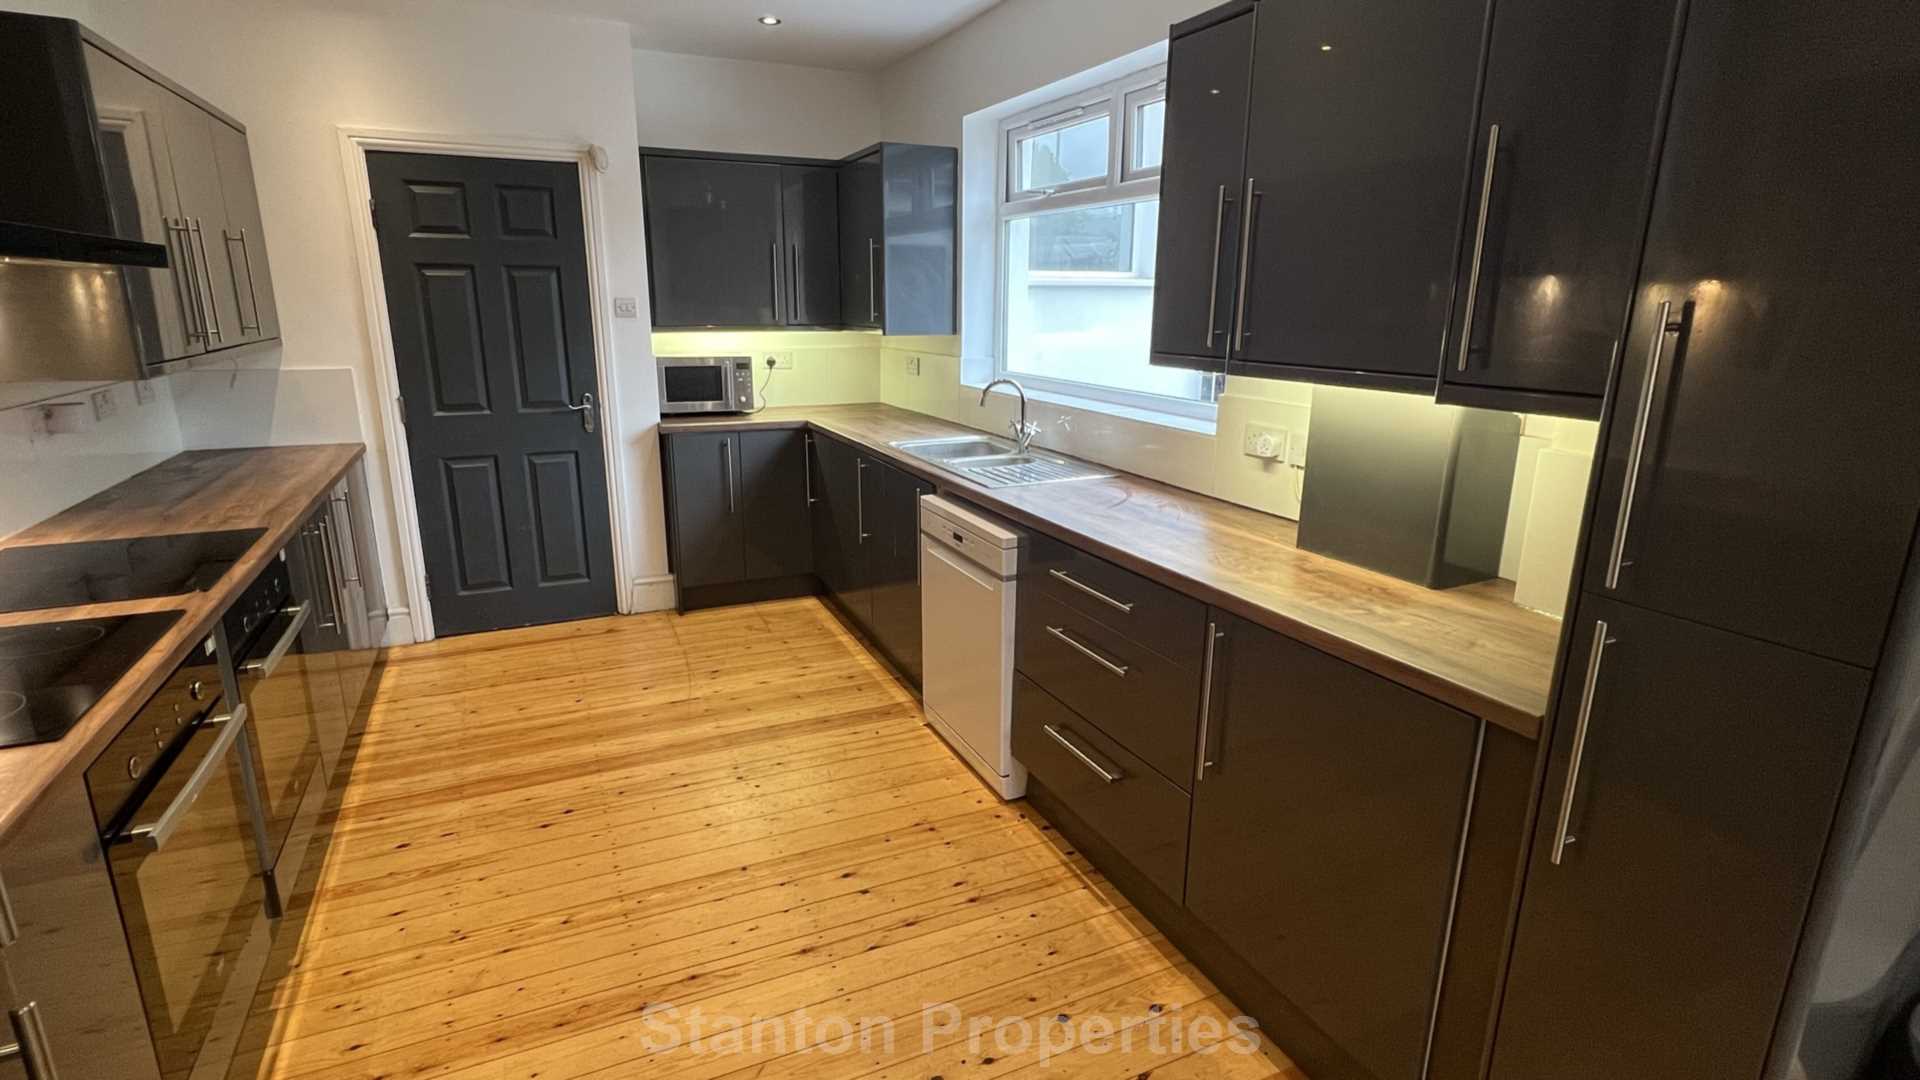 £150 PER WEEK / £650 PER MONTH, Lombard Grove, Manchester, Image 2